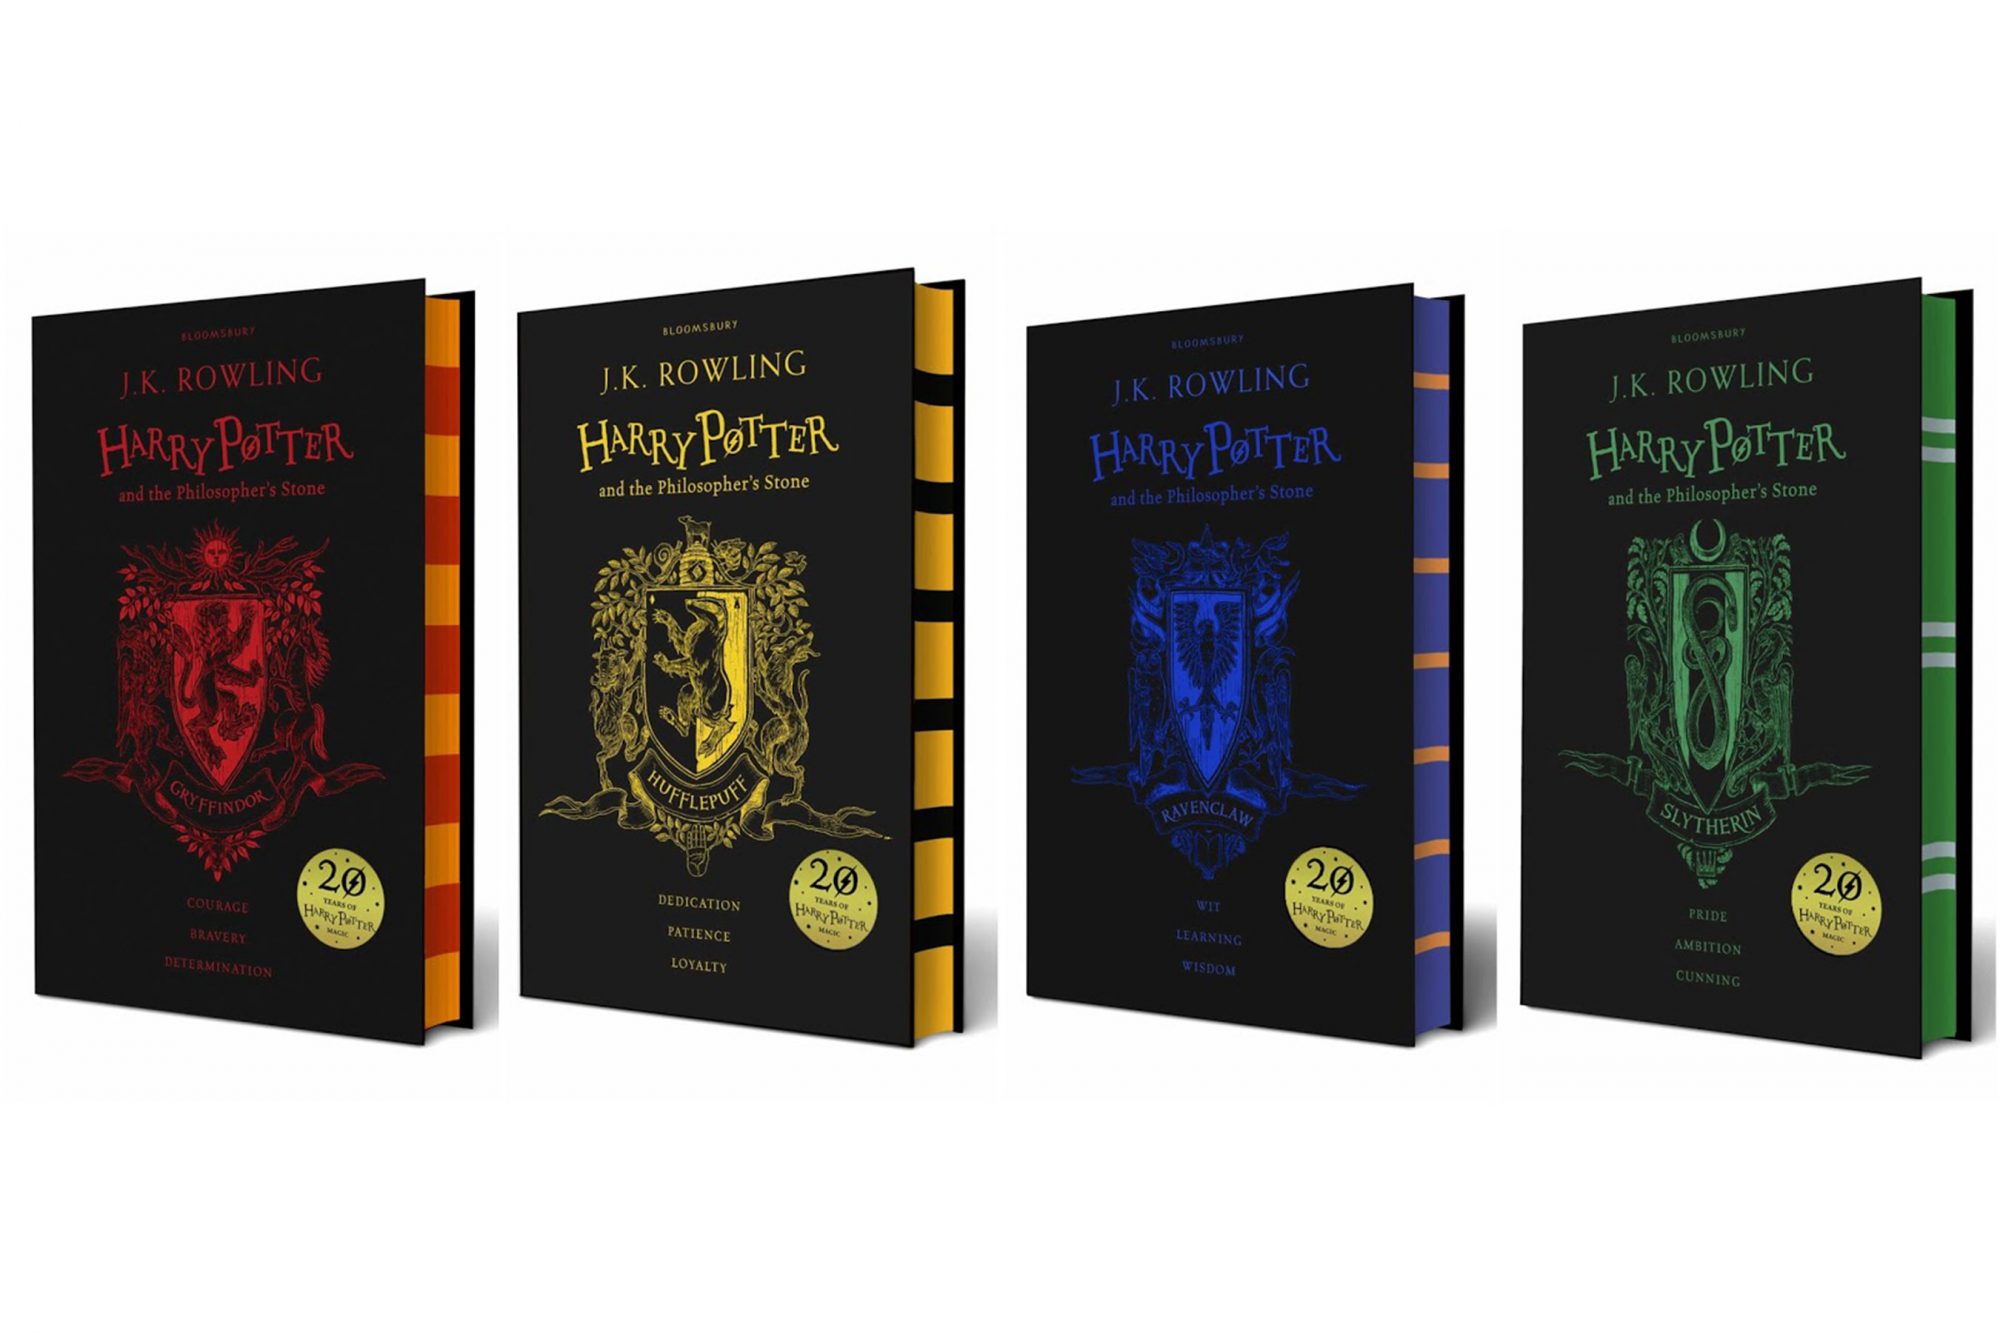 The Evolution of Harry Potter Books: From Sorcerer's Stone to Deathly Hallows 2